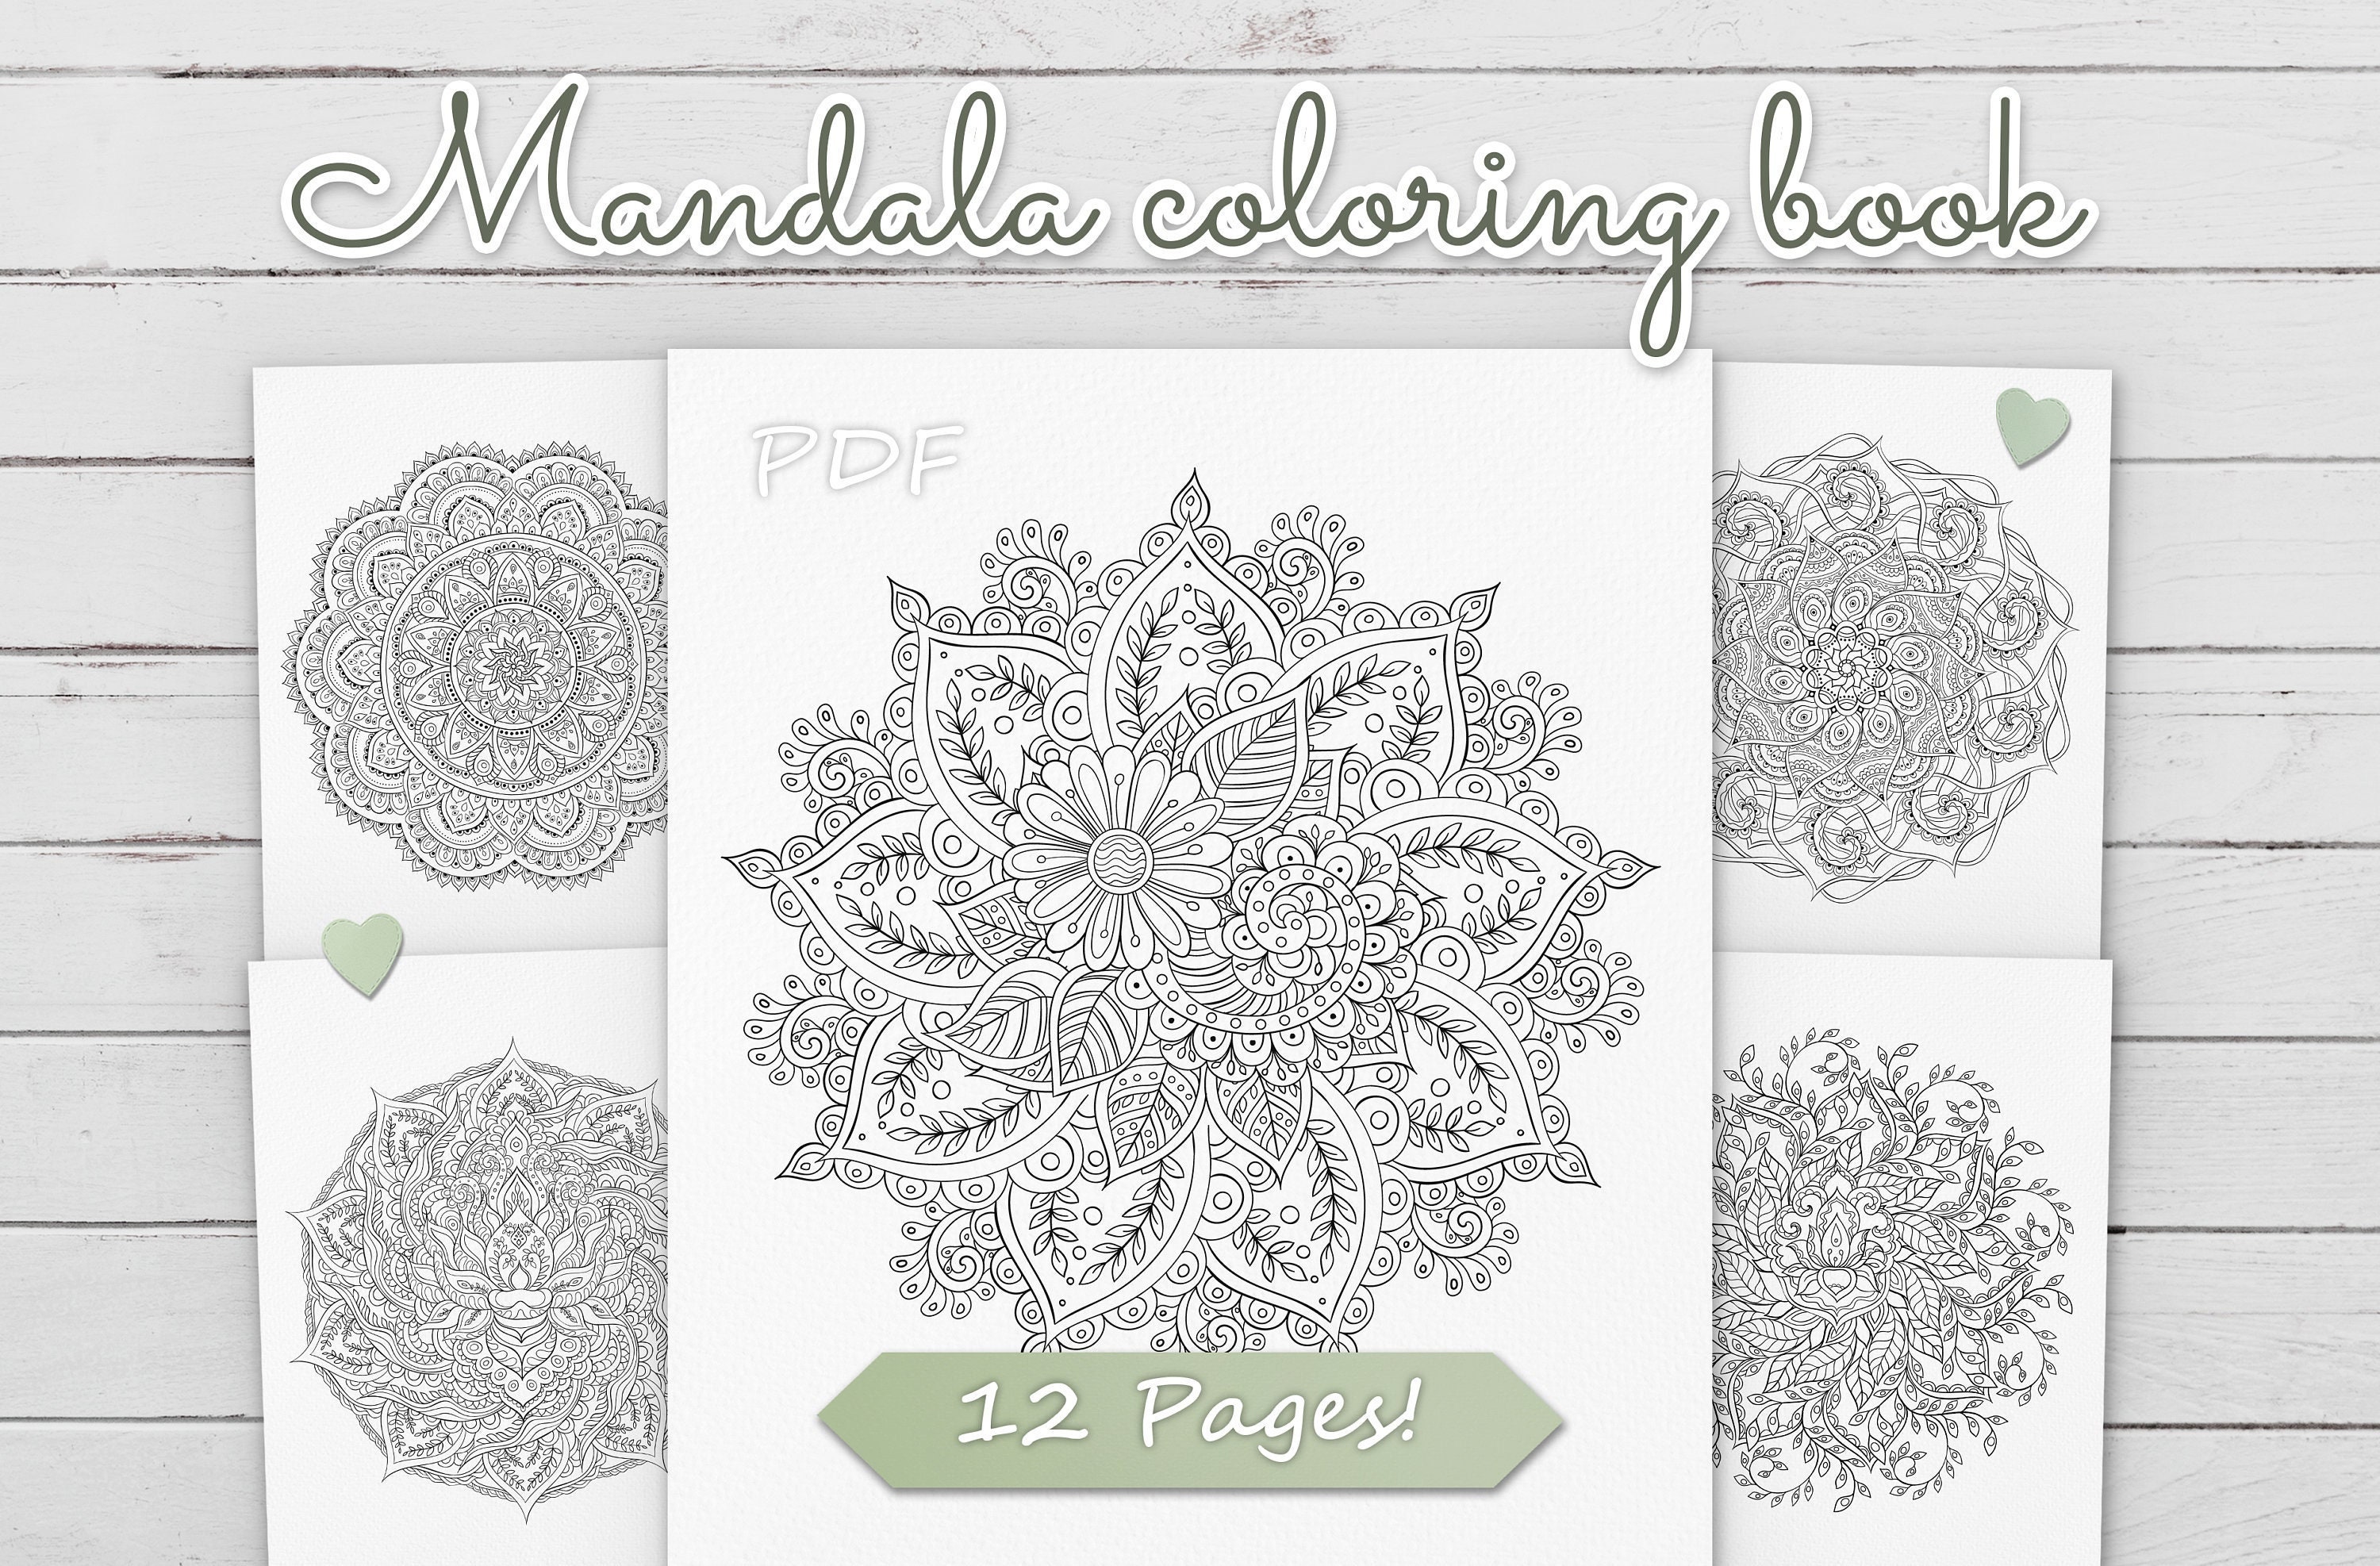 Mandala Adult Coloring Pages, Coloring Book PDF for Adults